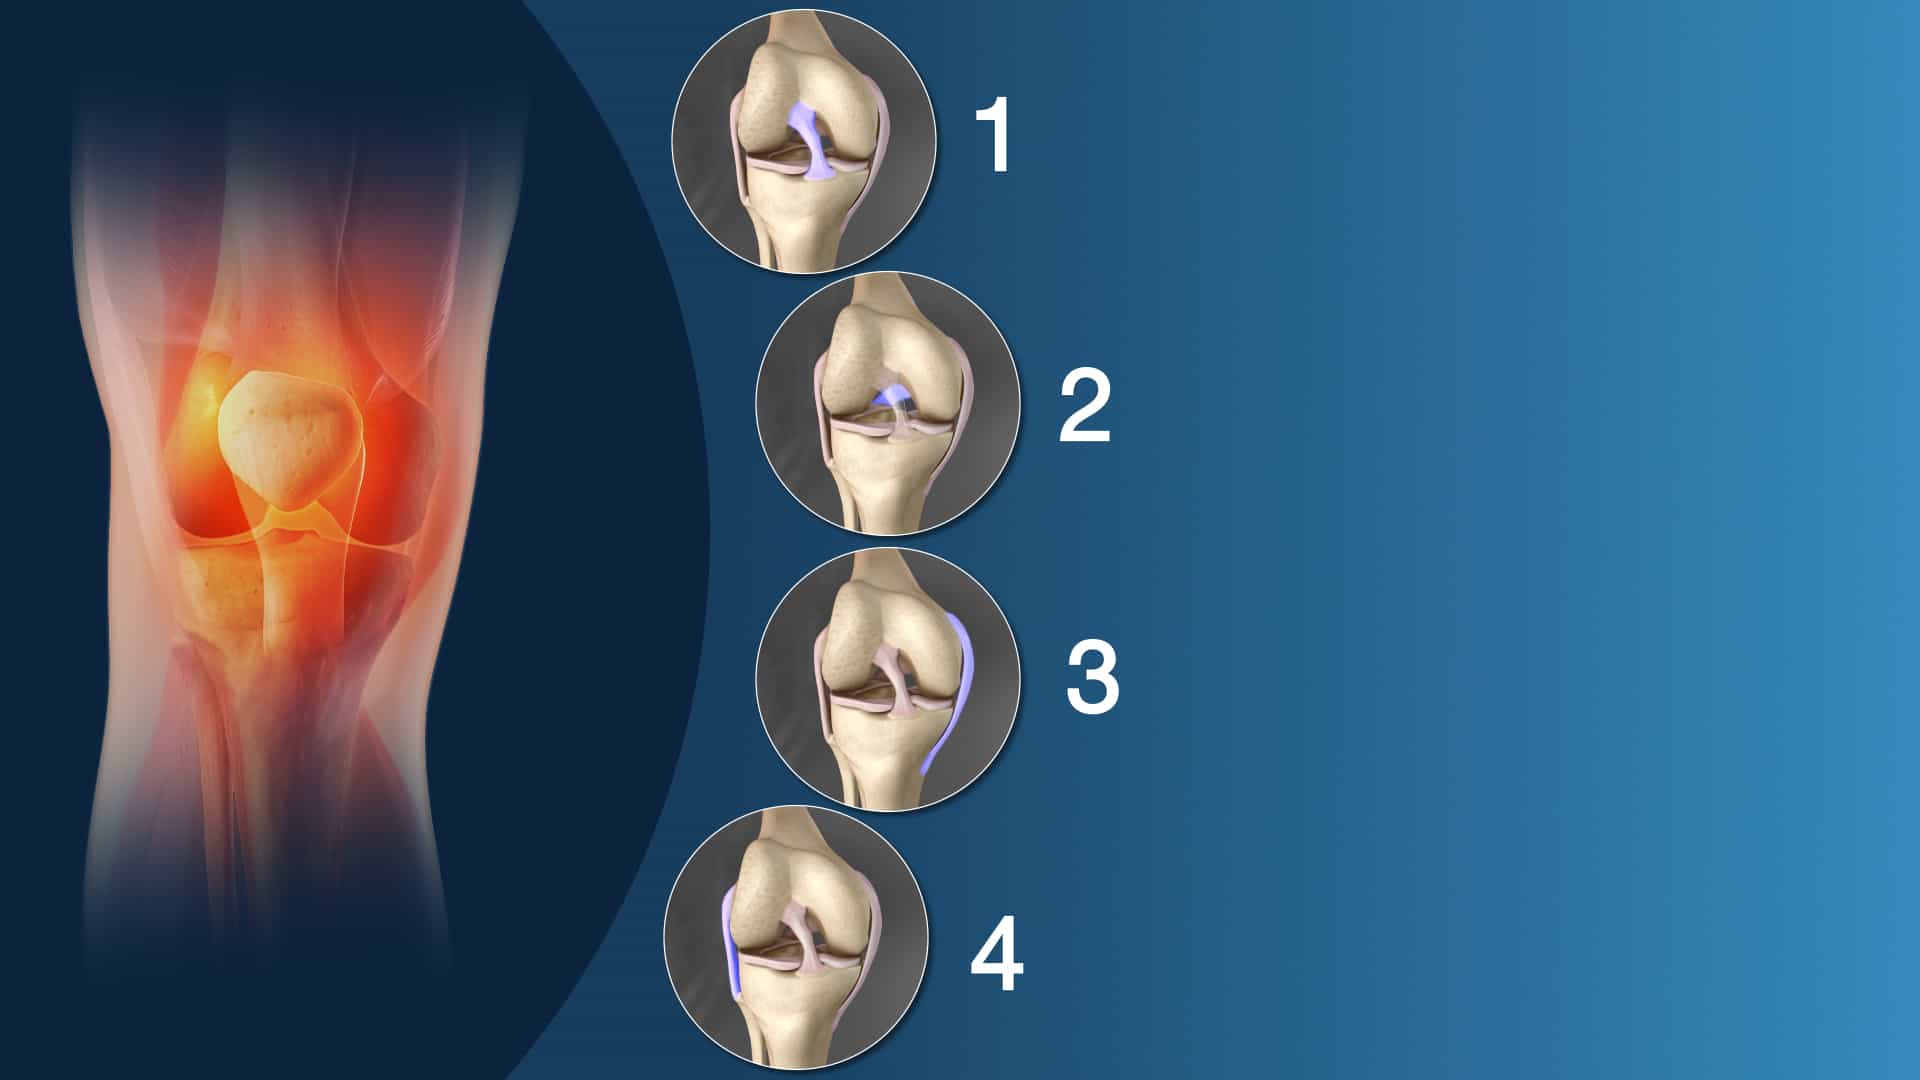 An infographic of knee sprain types